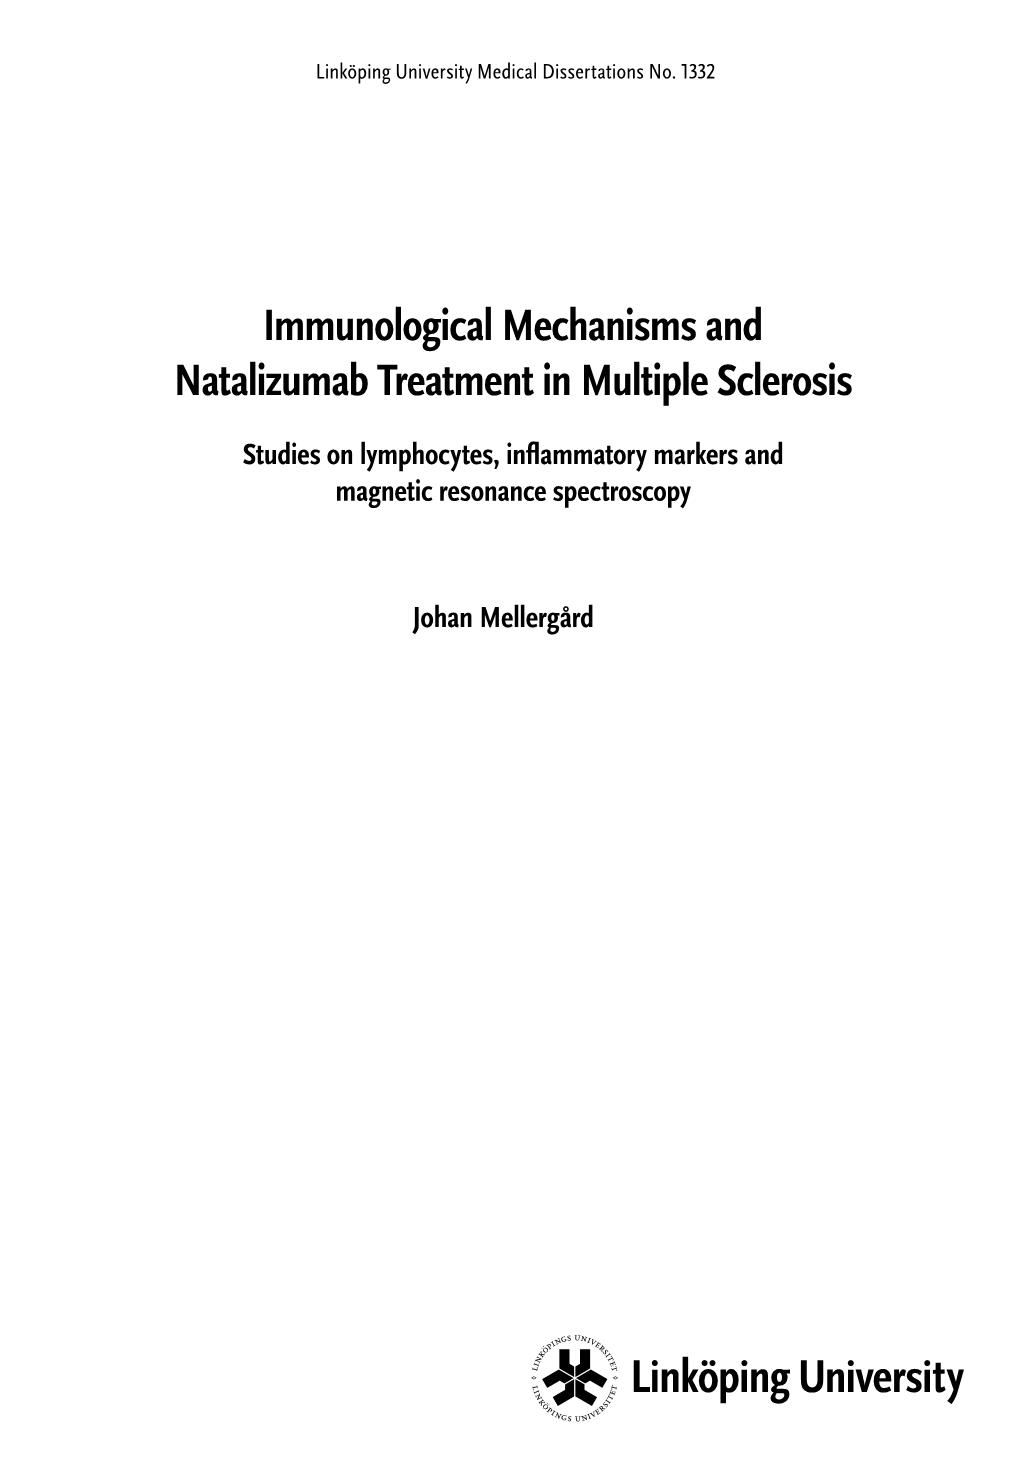 Immunological Mechanisms and Natalizumab Treatment in Multiple